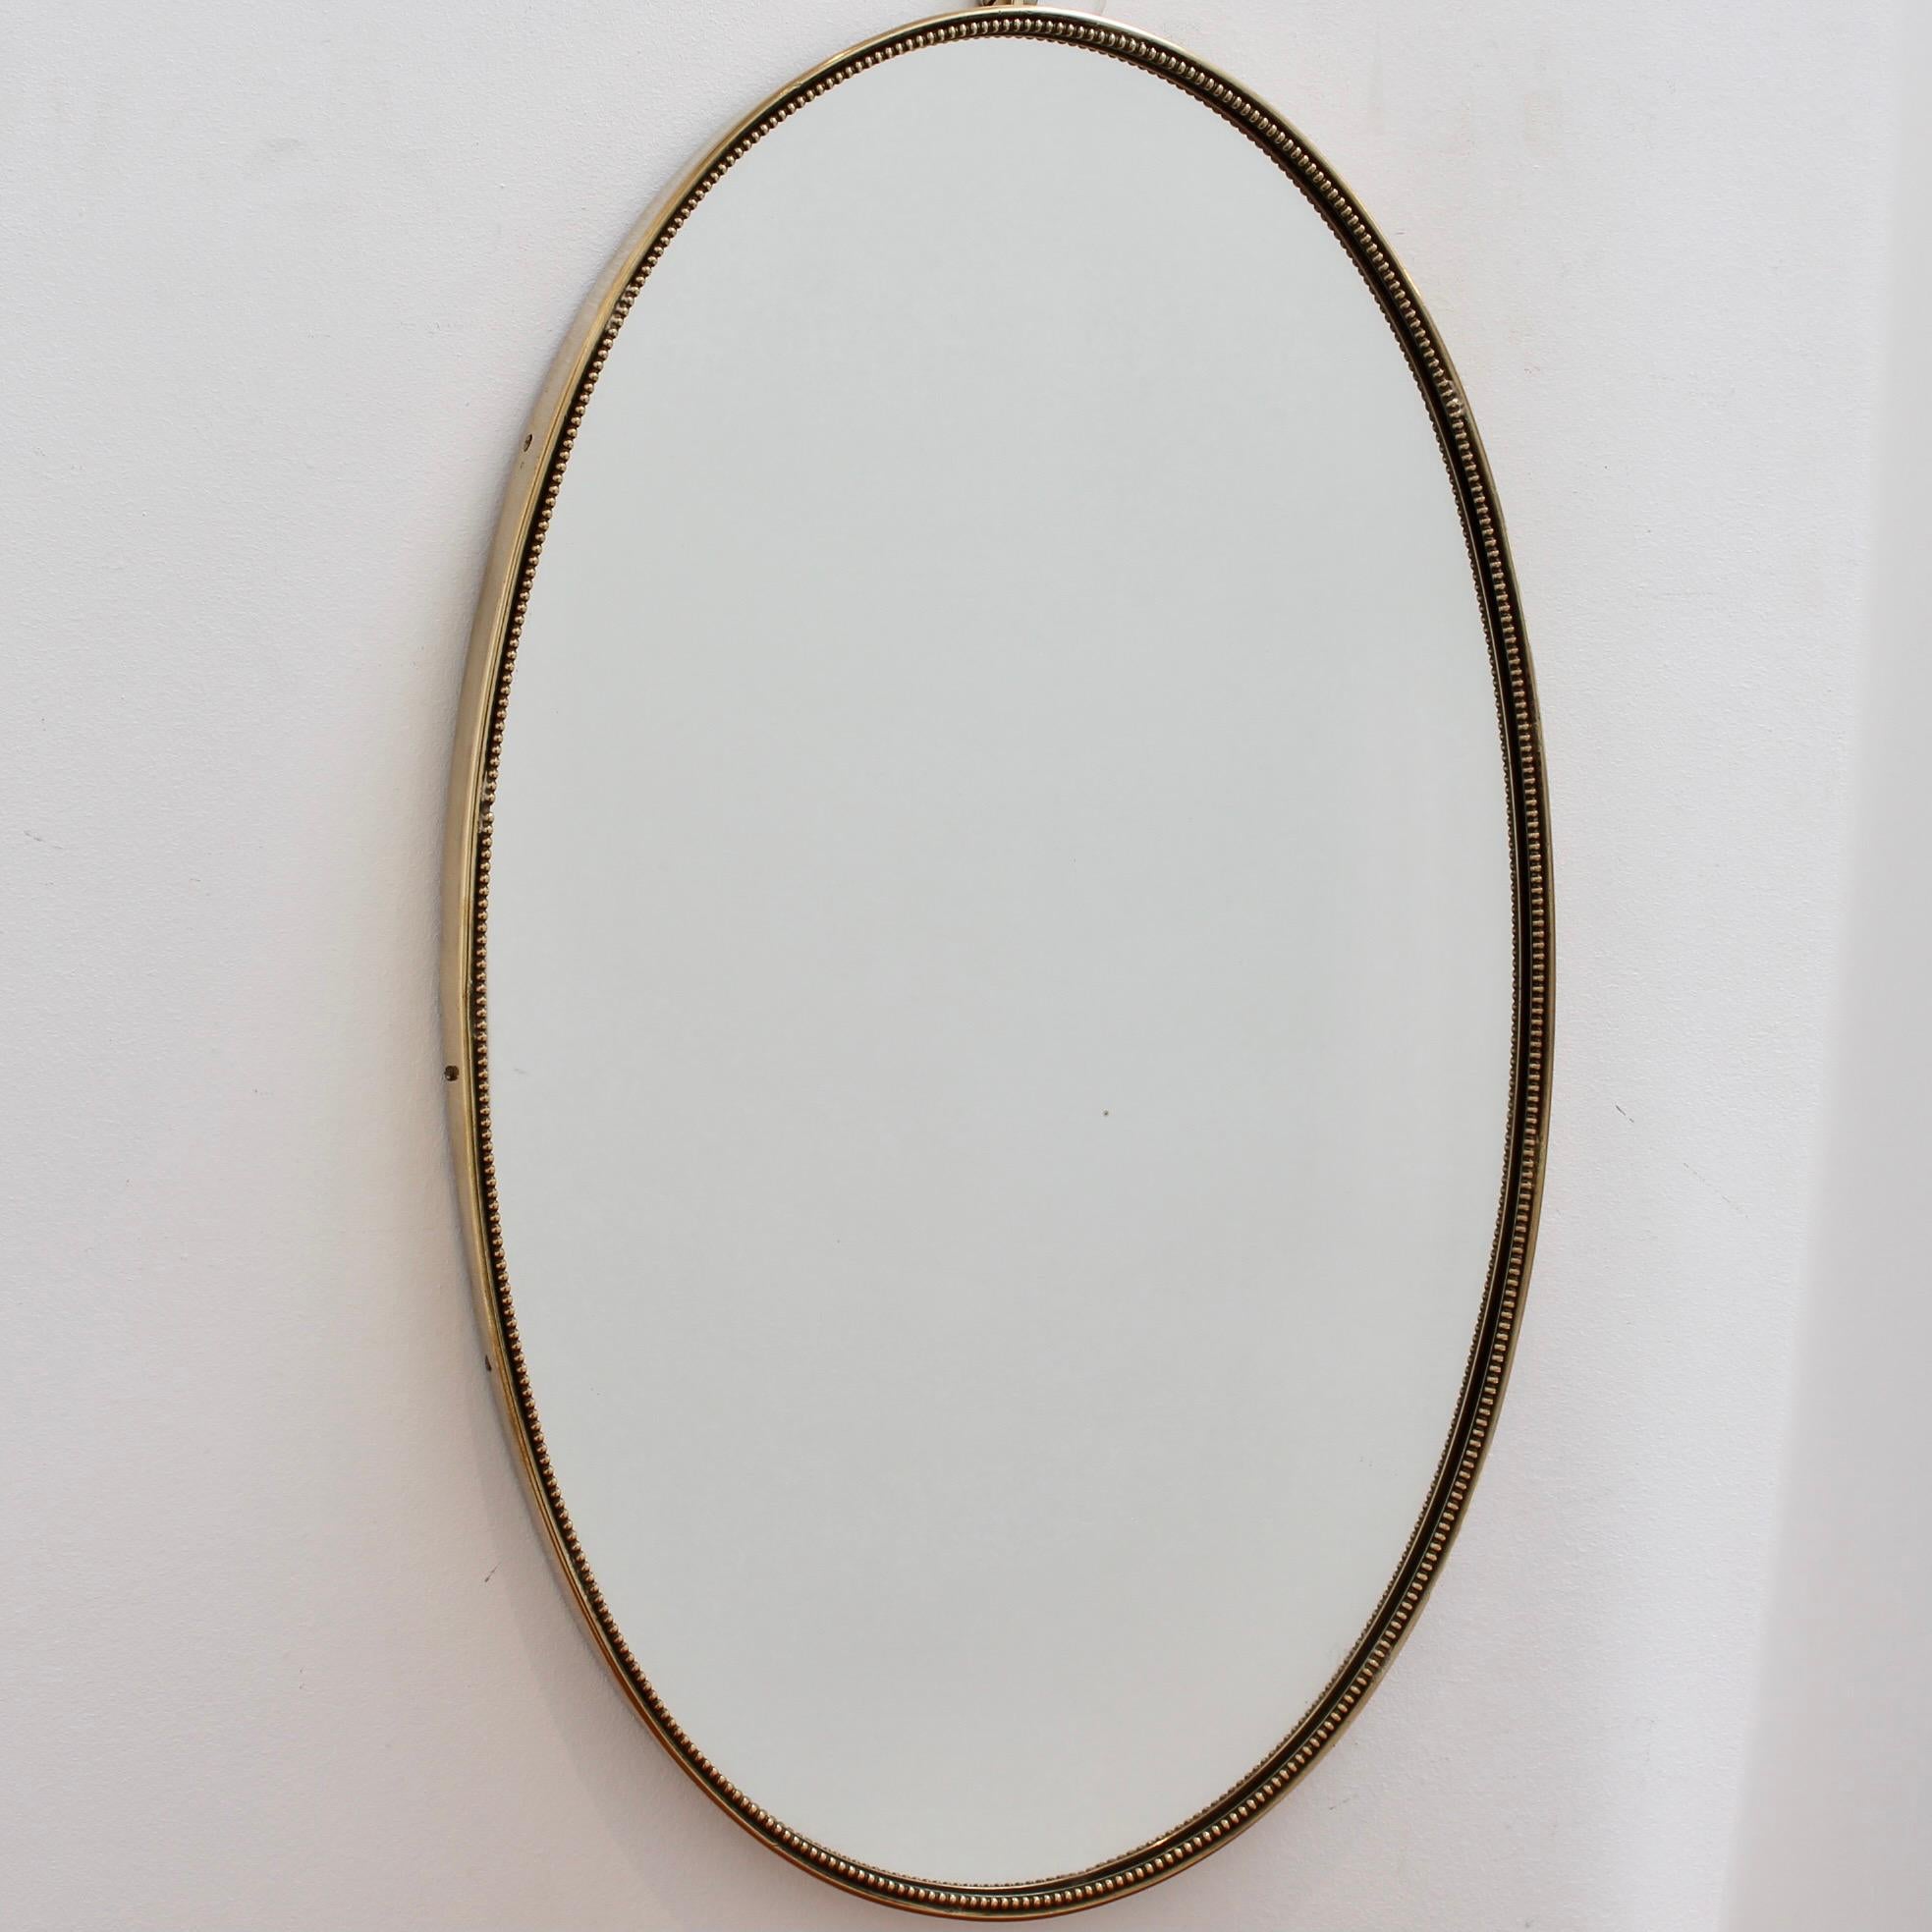 Mid-century Italian wall mirror with brass frame (circa 1950s). The mirror is oval in shape, very smart with irresistible durability. The visual impression is elegant and very distinctive in a modern Gio Ponti style. A distinctive beading outlines